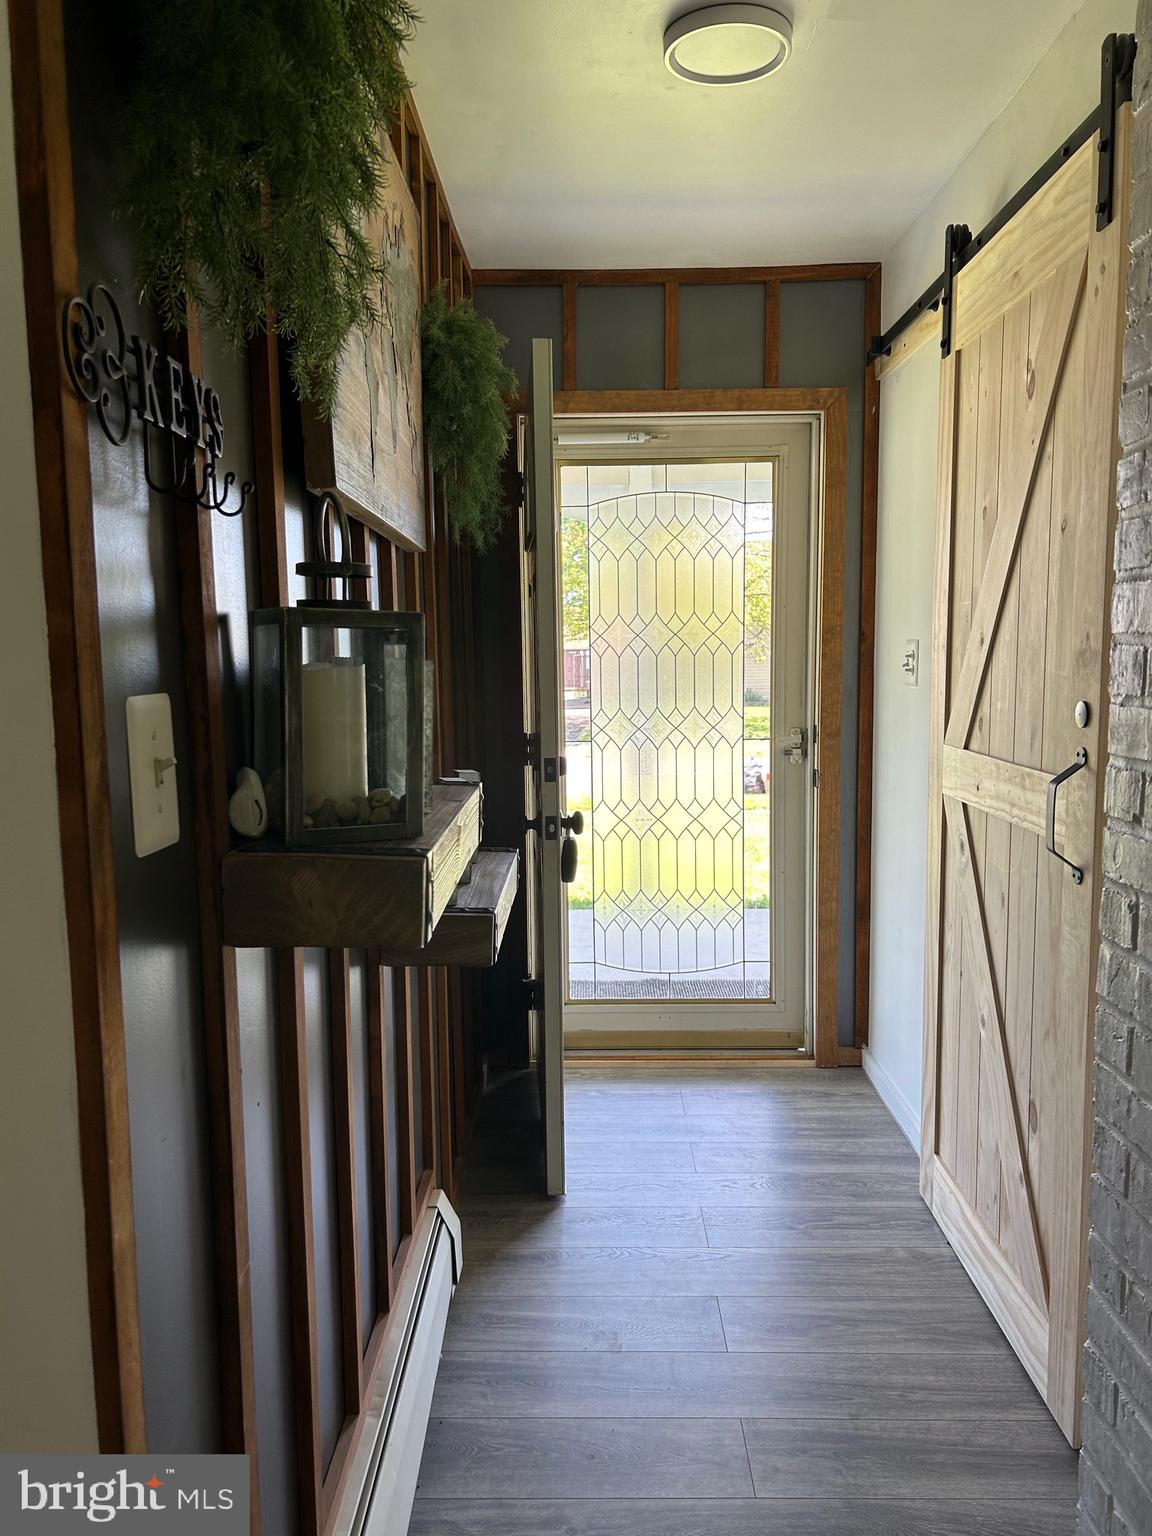 a view of entryway with a door and wooden floor